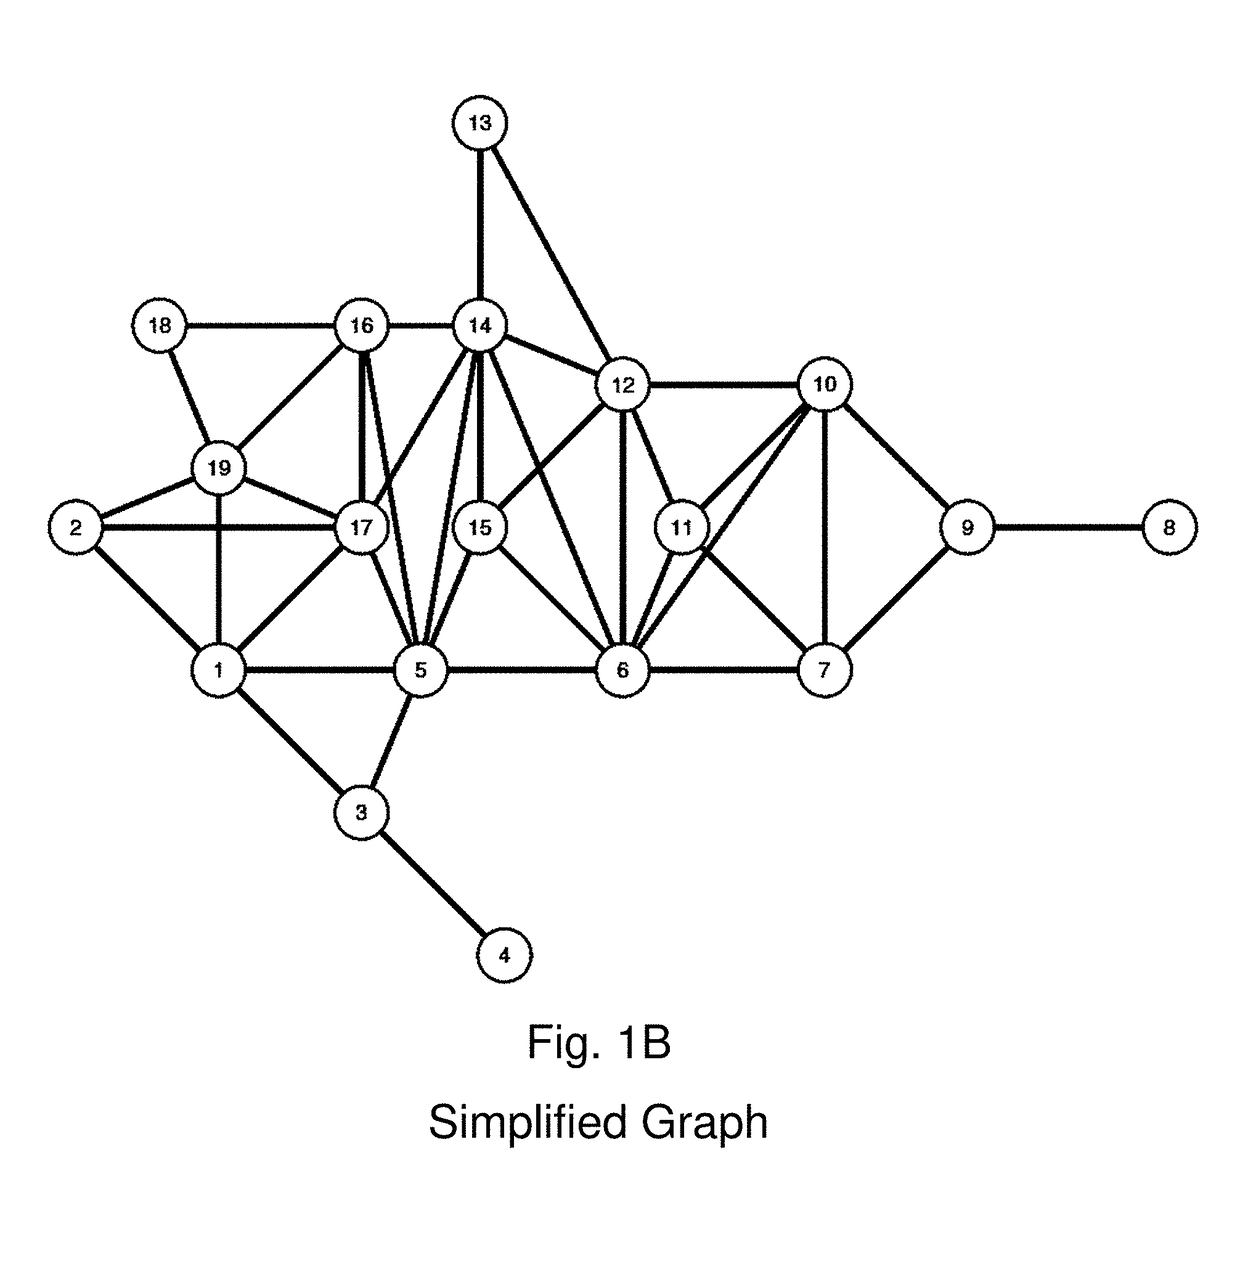 Neutral radistricting using a multi-level weighted graph partitioning algorithm